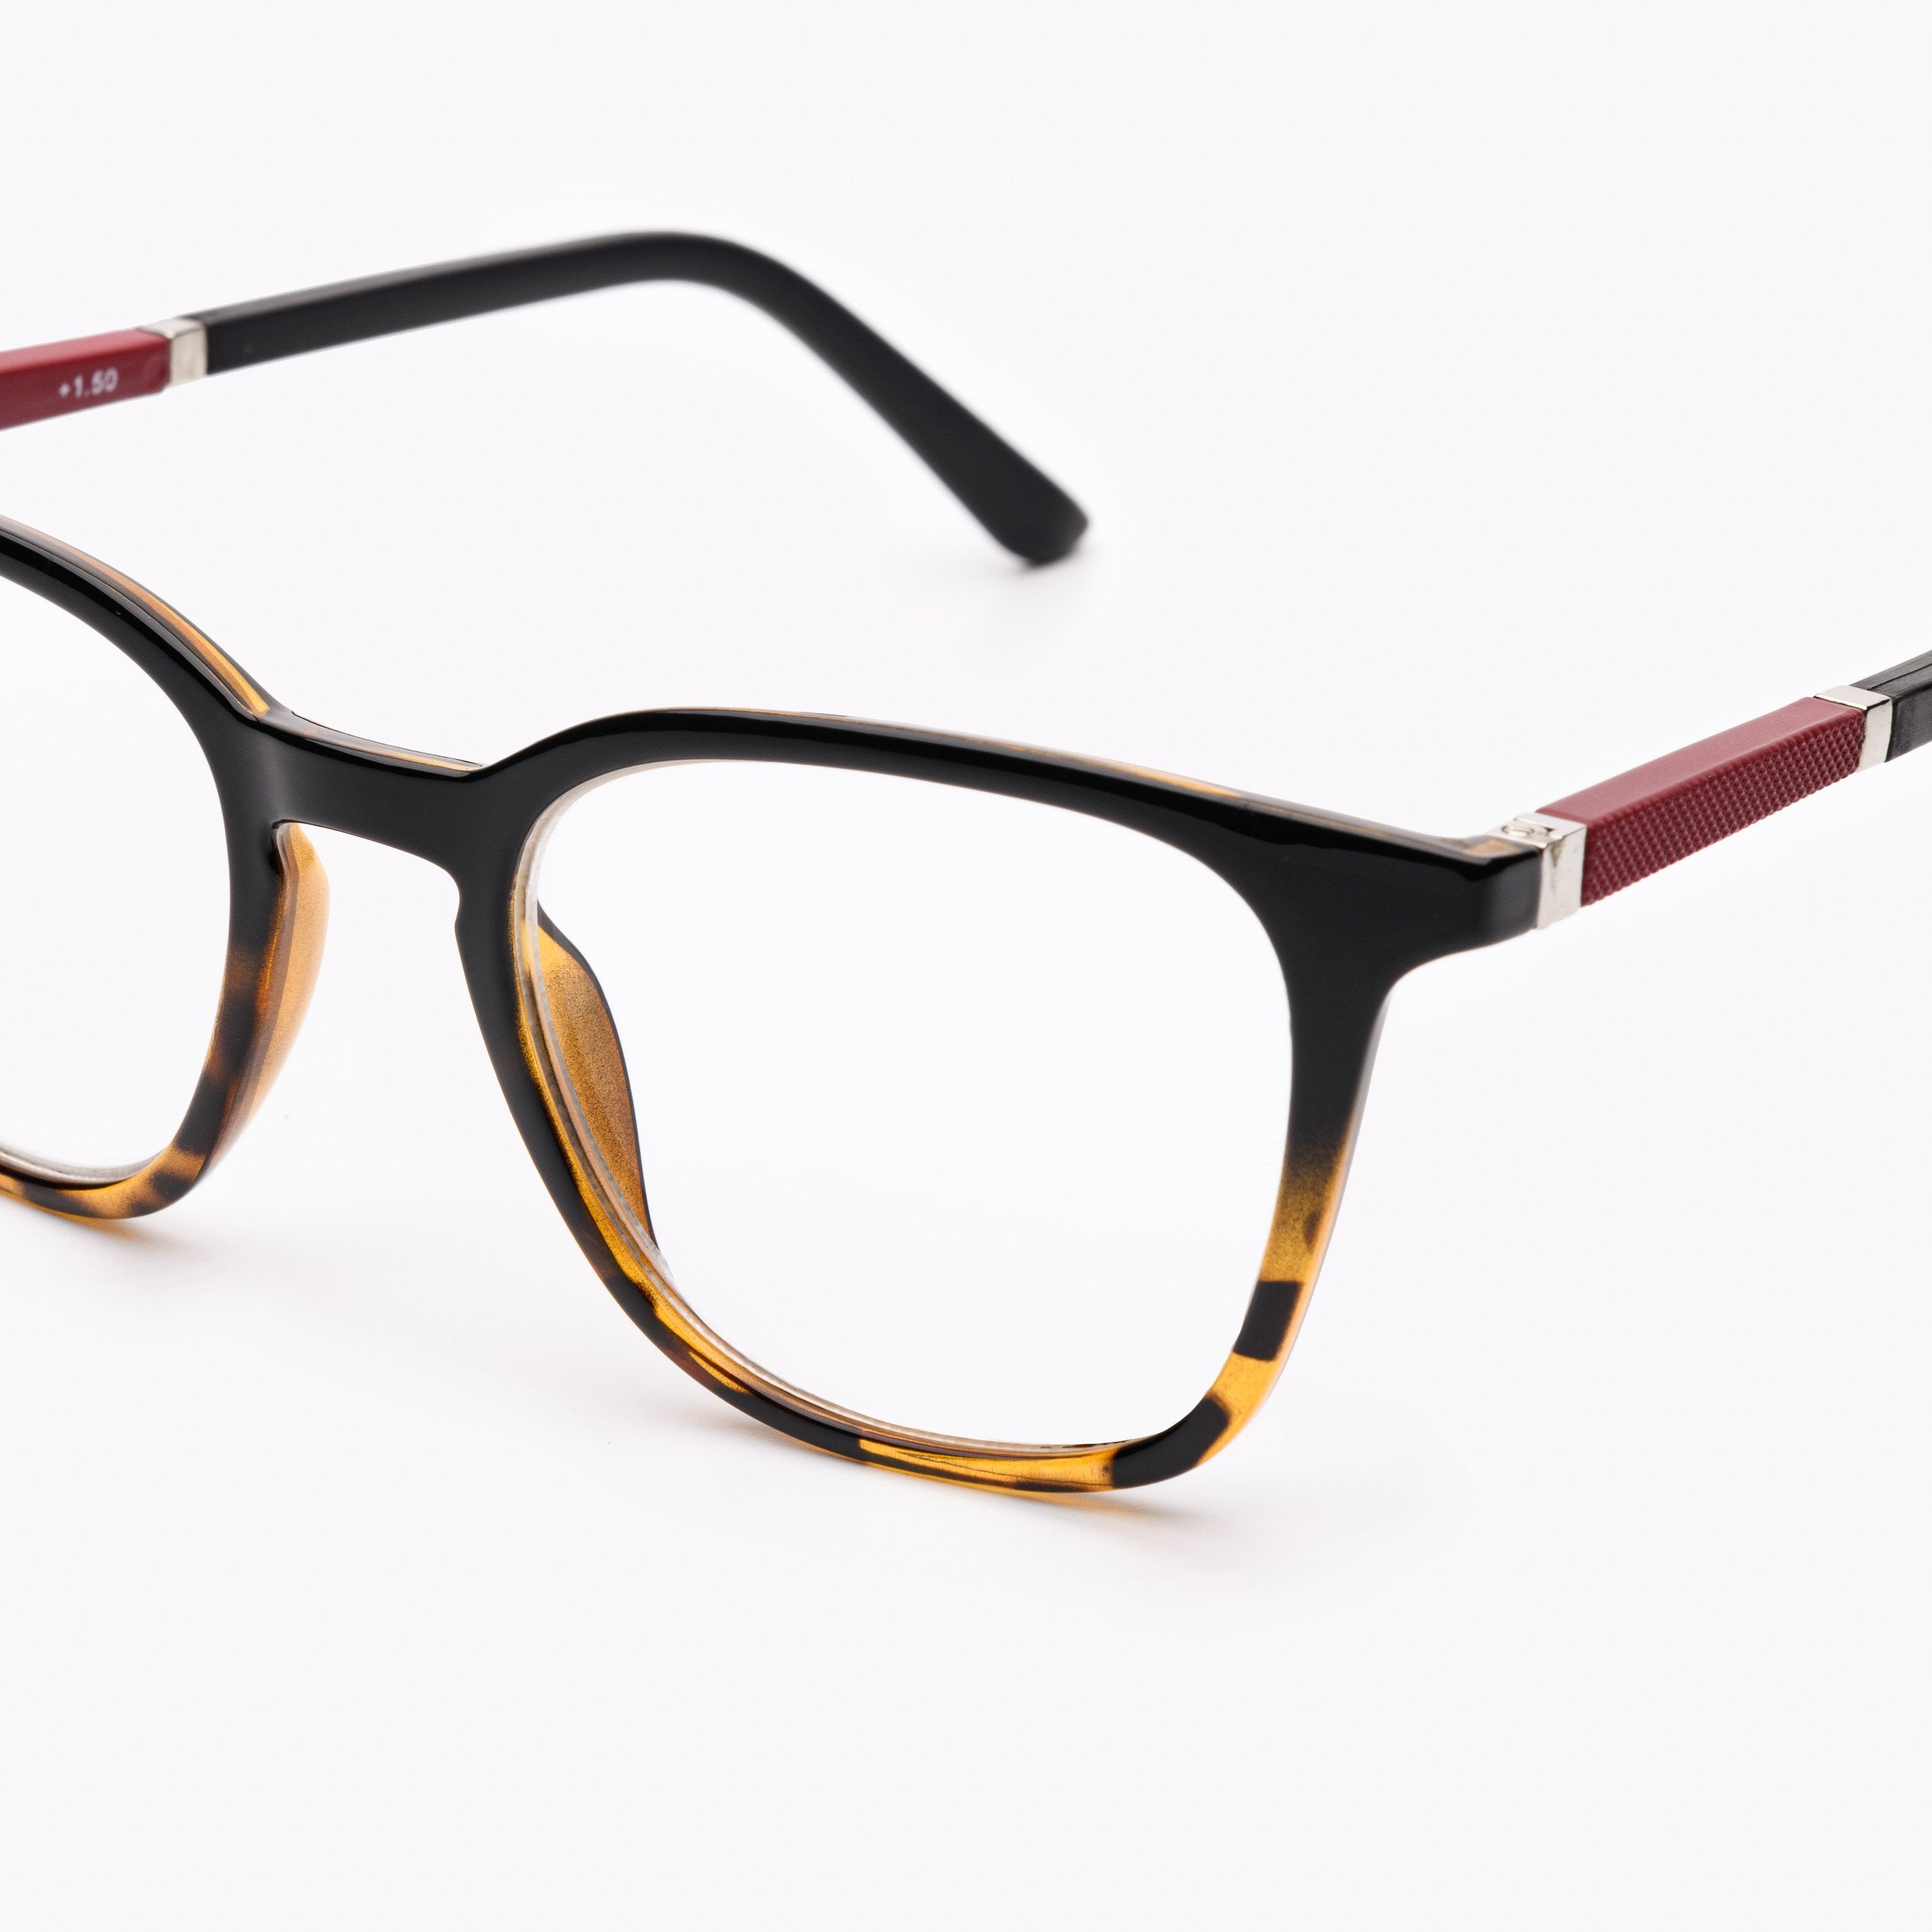 Wayfarer reading glasses scale pattern red temples